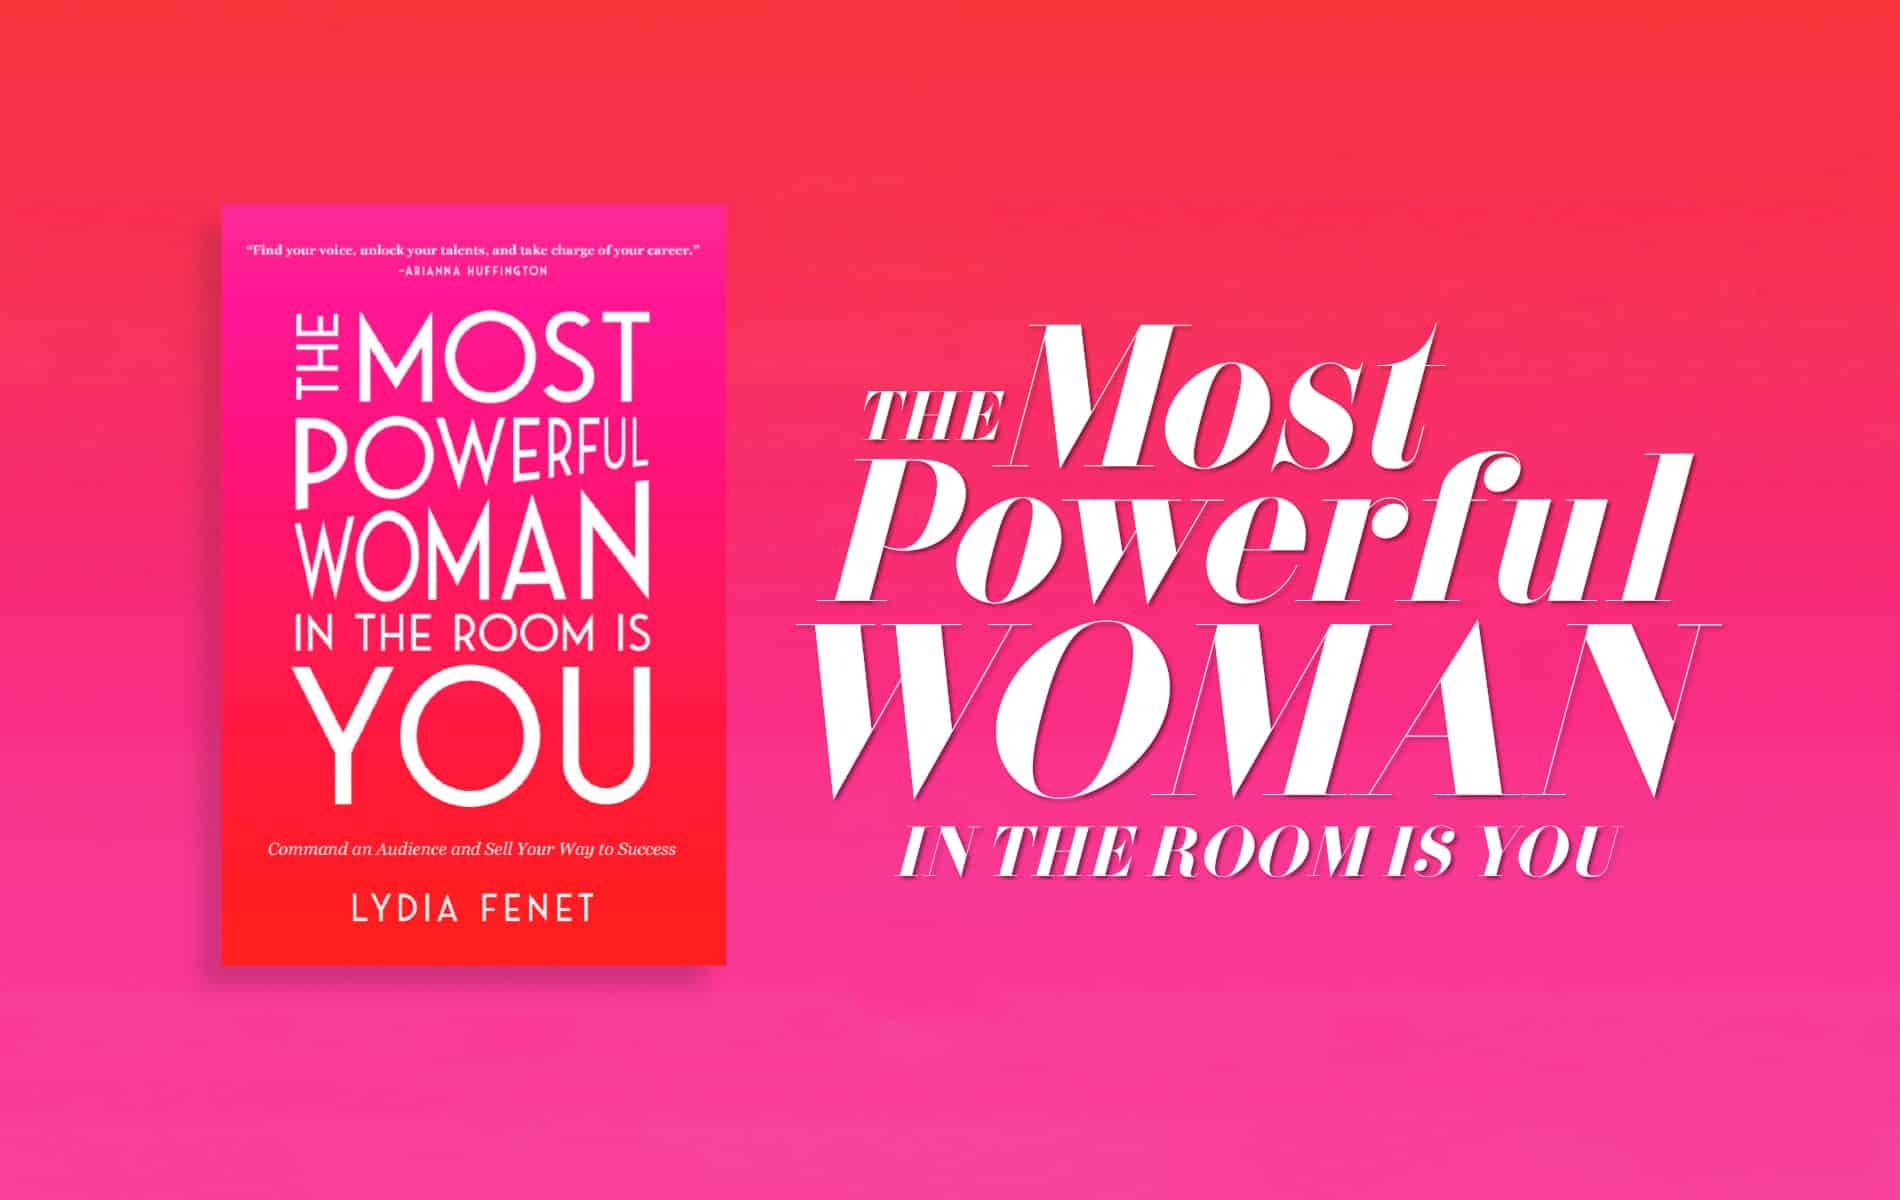 The Most Powerful Women in the Room Is You, Lydia Fenet, VIE Book Club